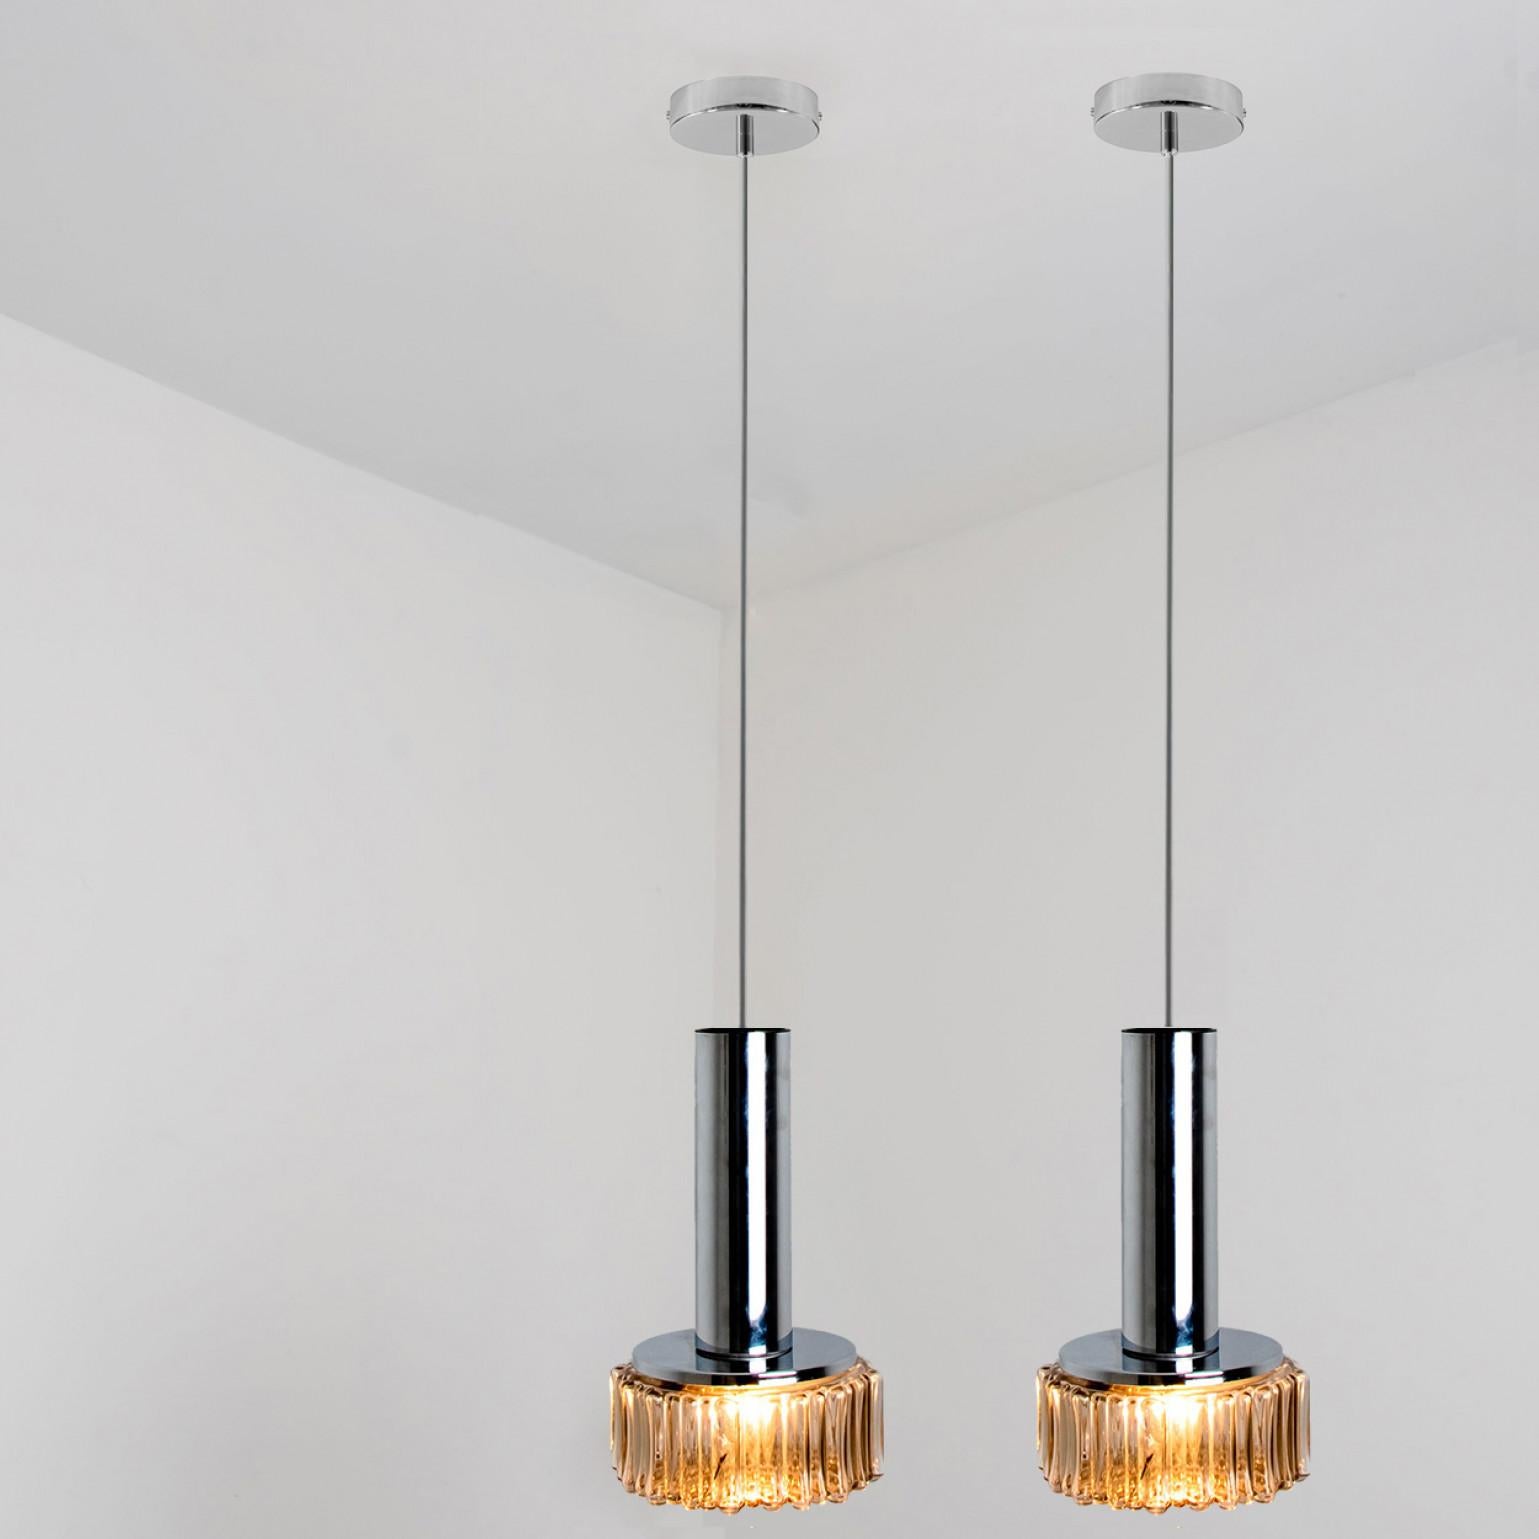 Late 20th Century Bubble Glass Clear Silver Chrome Pendant Lights by Staff Leuchten, 1970s For Sale